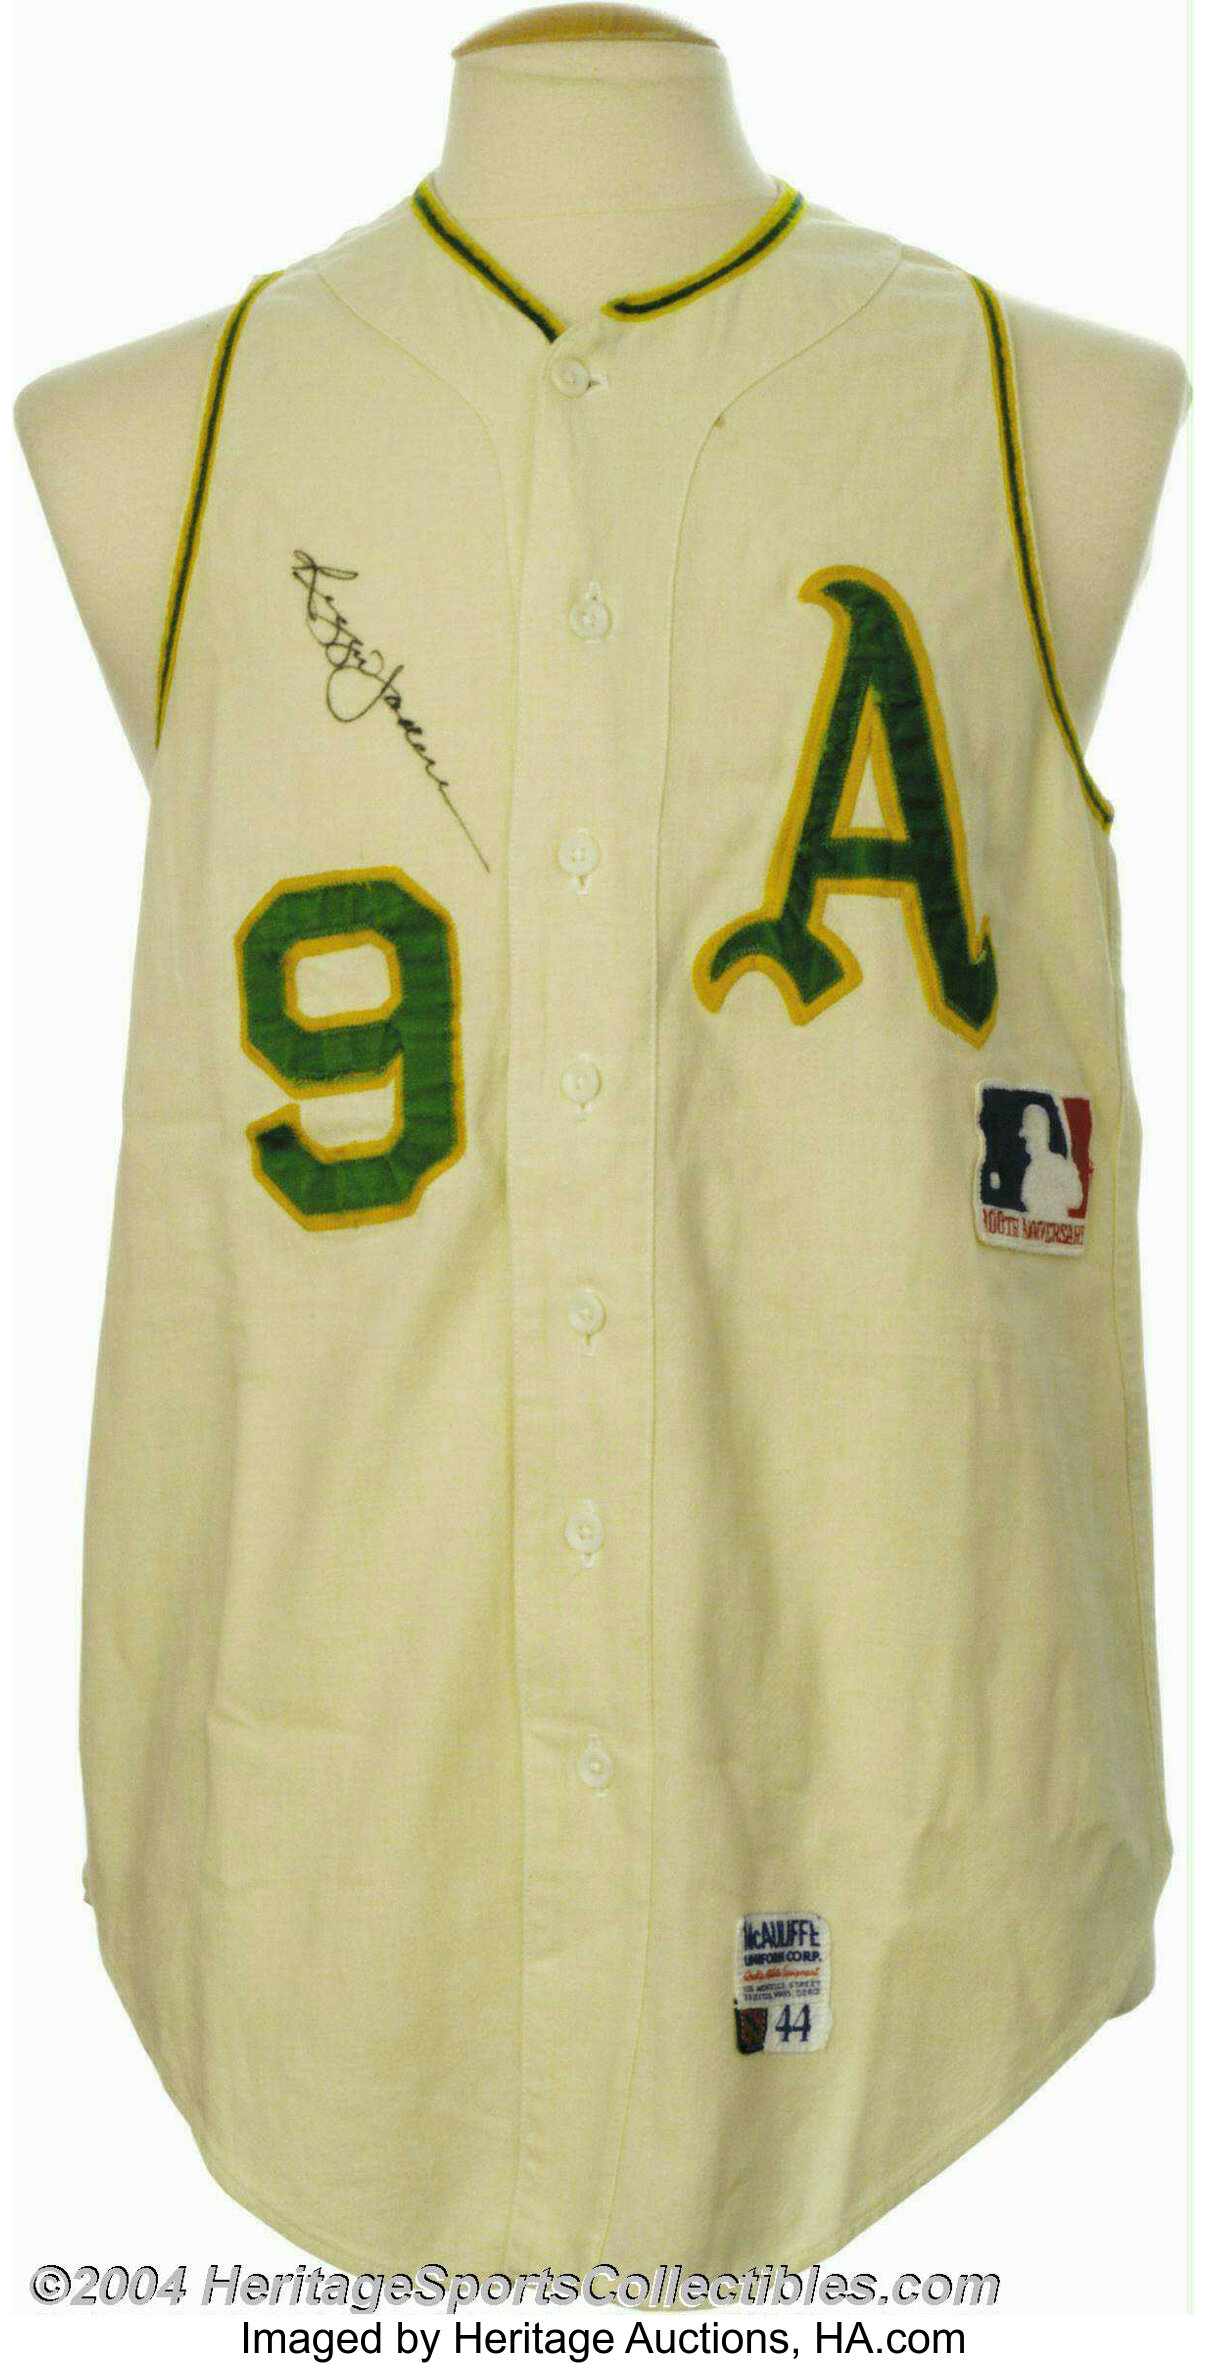 Lot Detail - 1969-1970 Reggie Jackson Game Used & Signed Oakland A's Jersey  Vest Photo Matched to 3 Topps Baseball Cards and a Home Run Game - HR Jersey!  (Jackson LOA & Sports Investors Authentication)